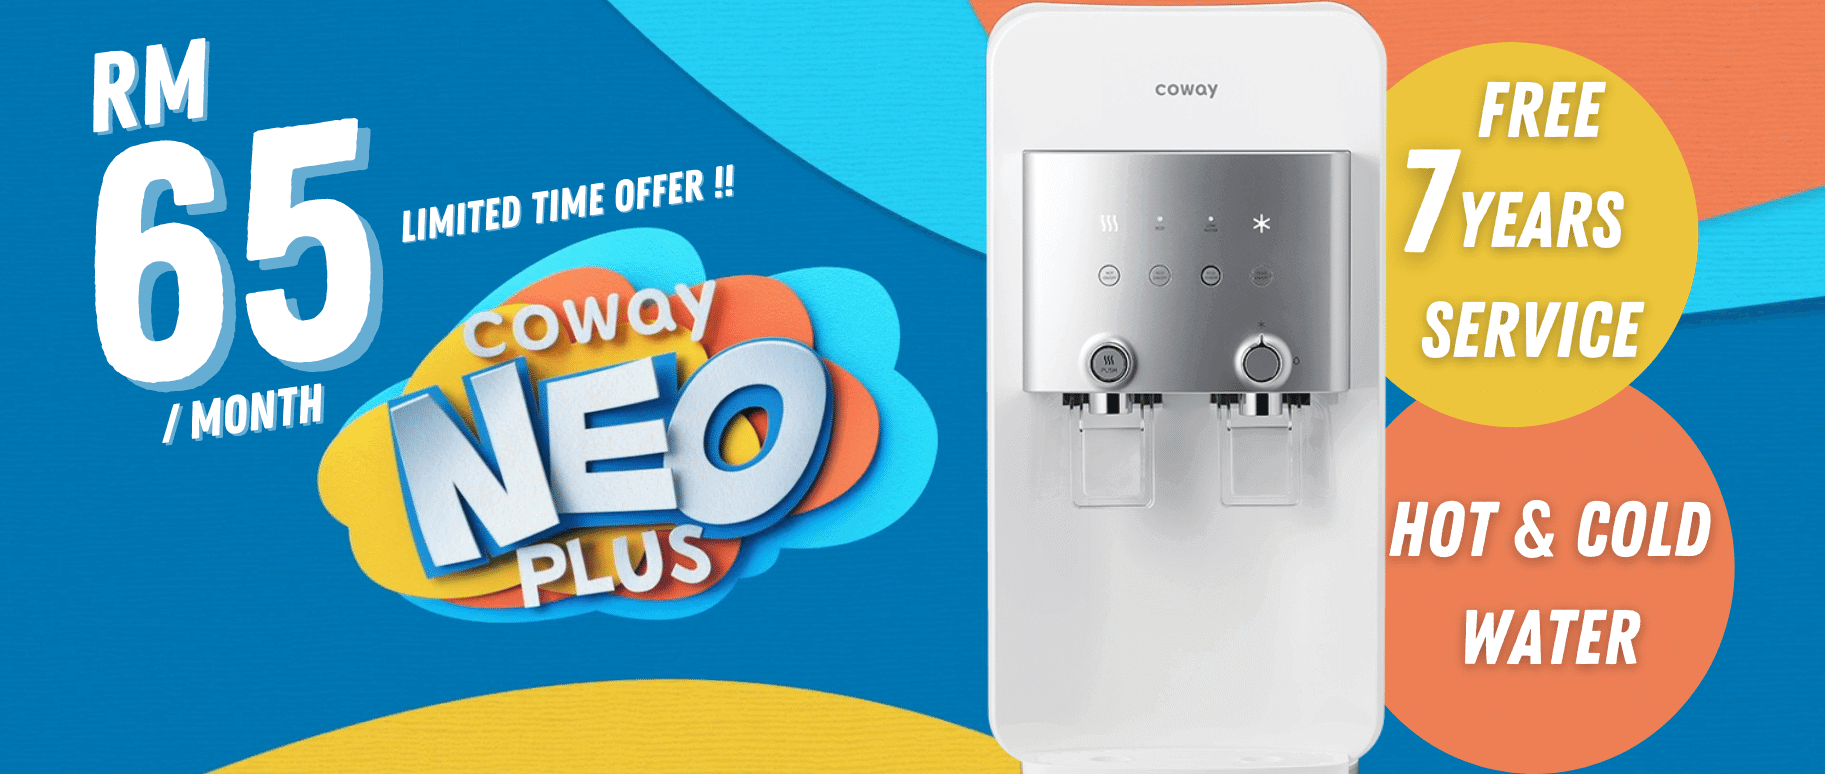 Coway Neo Plus RM65 Promotion